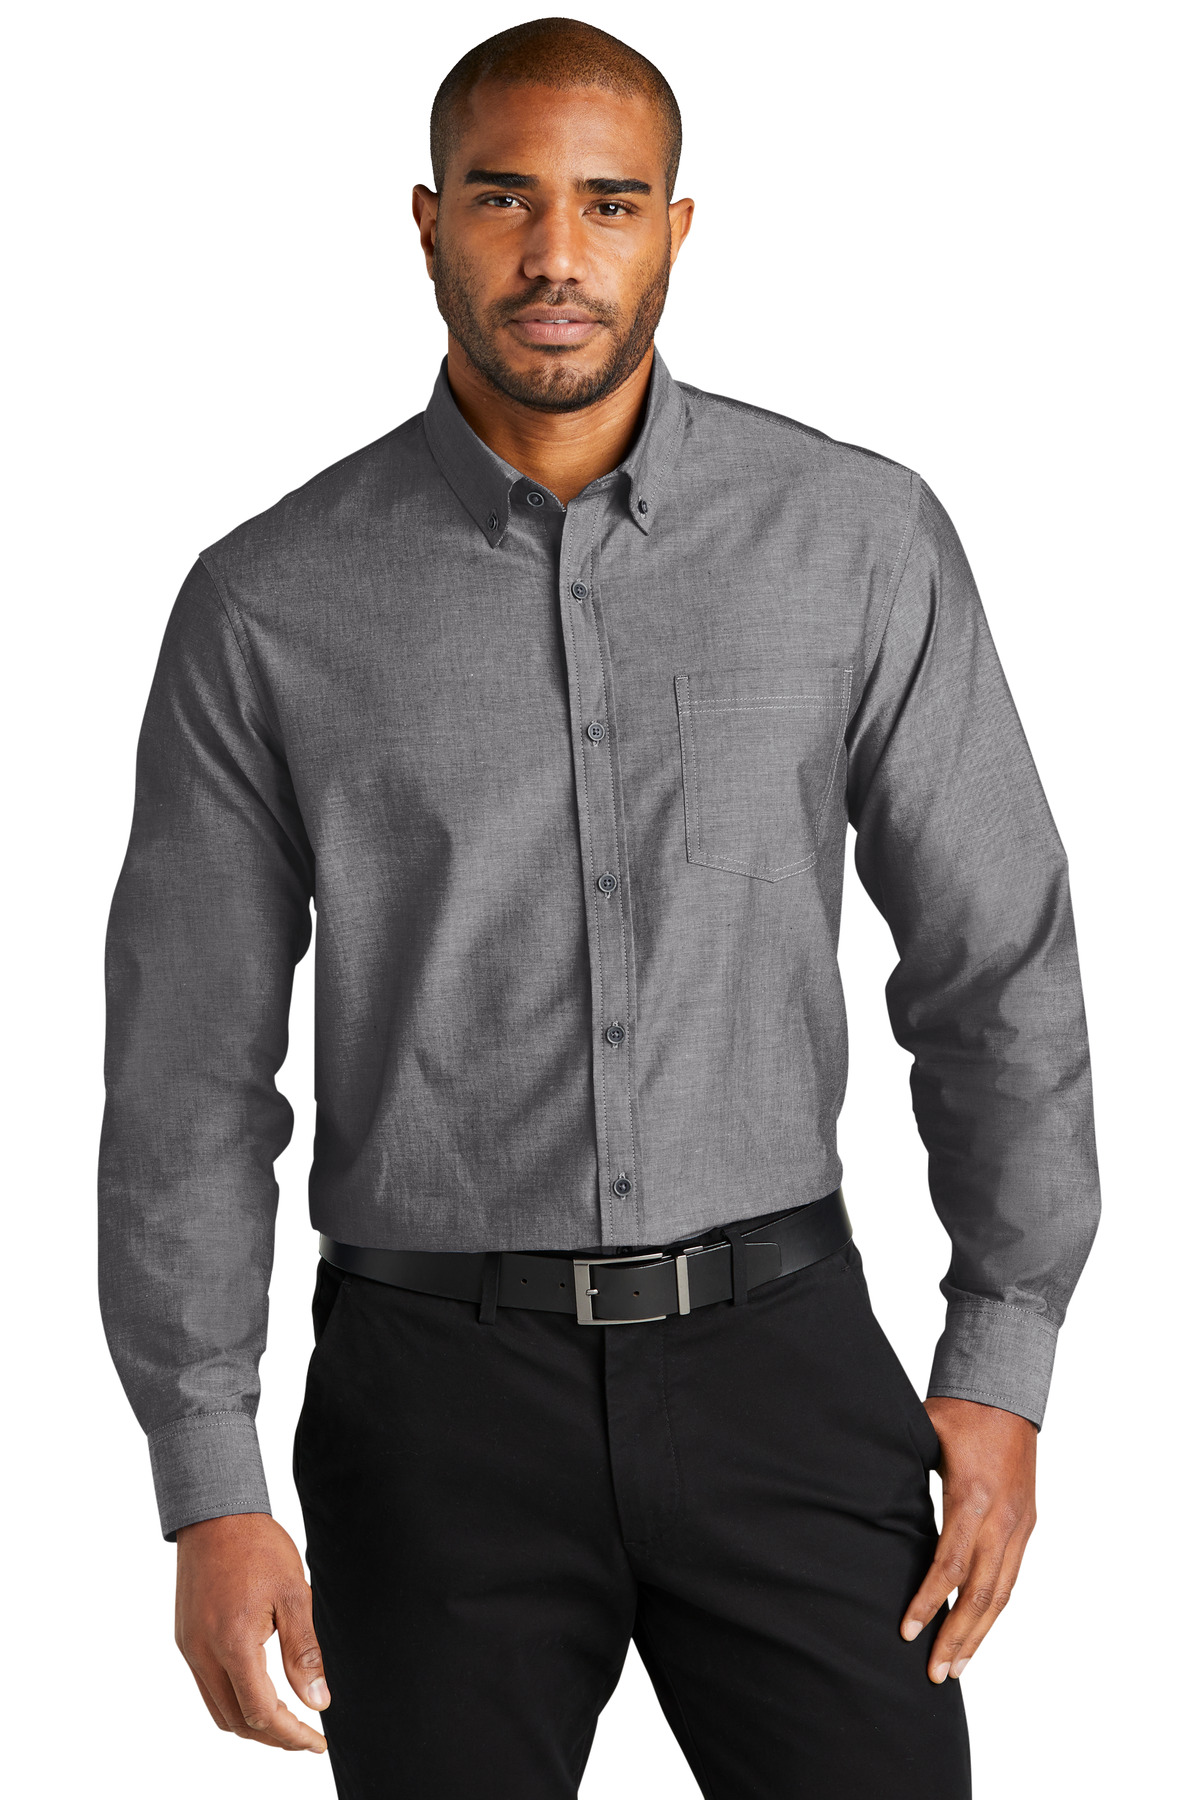 Port Authority Long Sleeve Chambray Easy Care Shirt-Port Authority